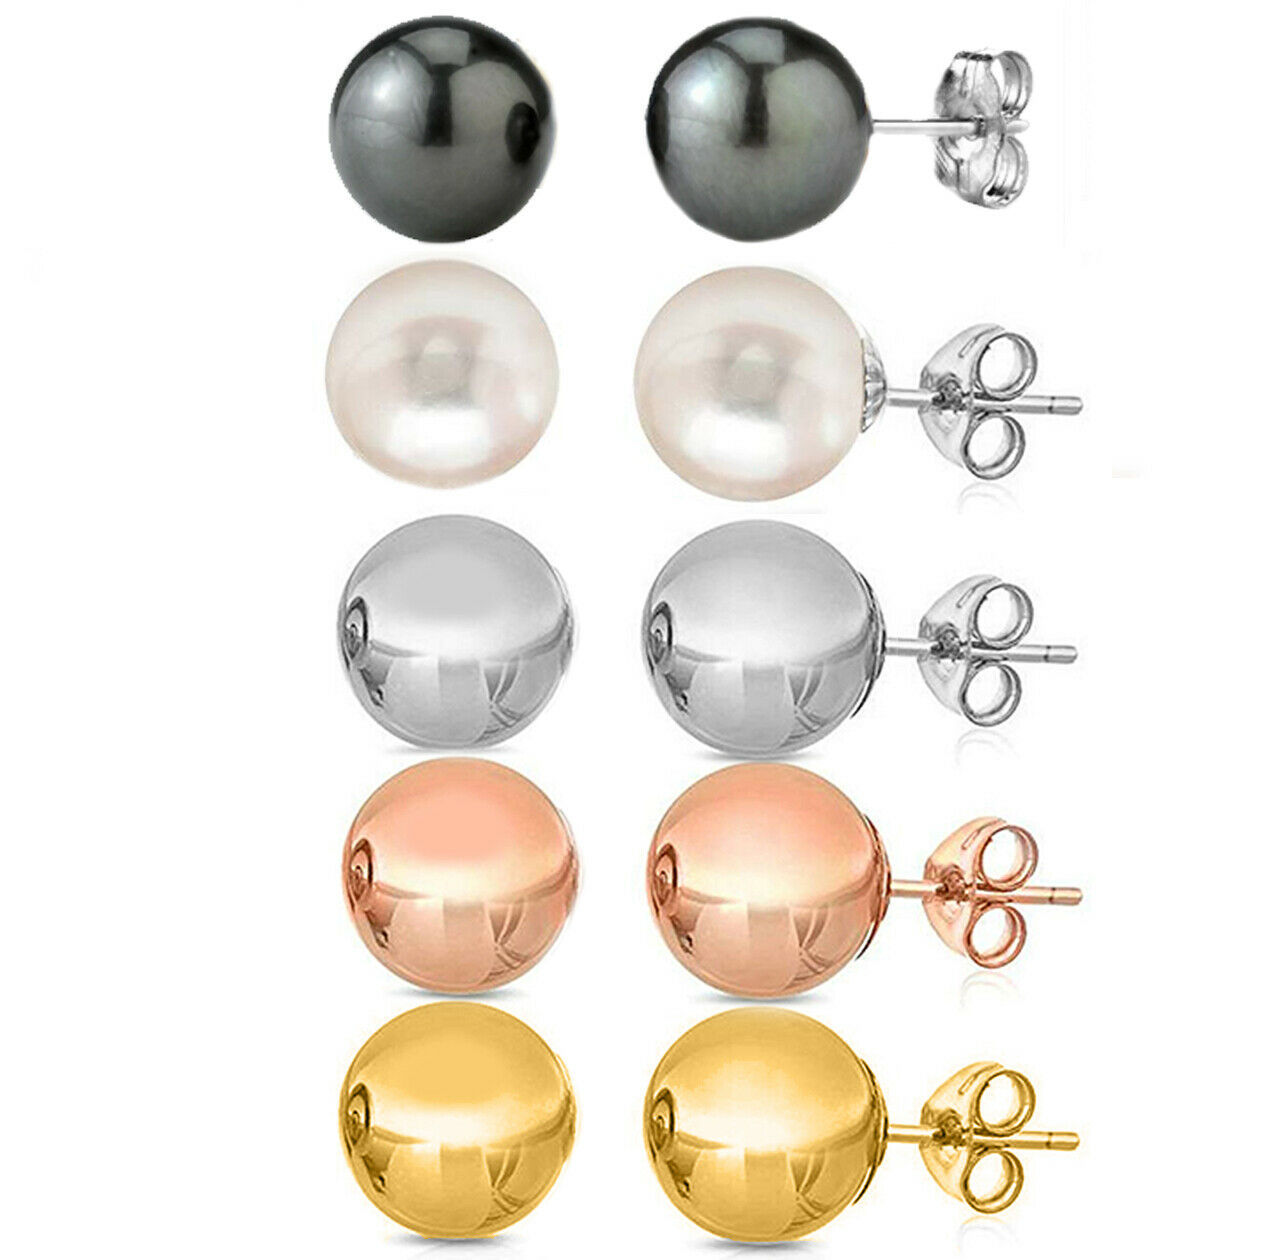 3 Pairs AAA+ Quality 925 Sterling Silver Freshwater Cultured Stud Pearl Earrings